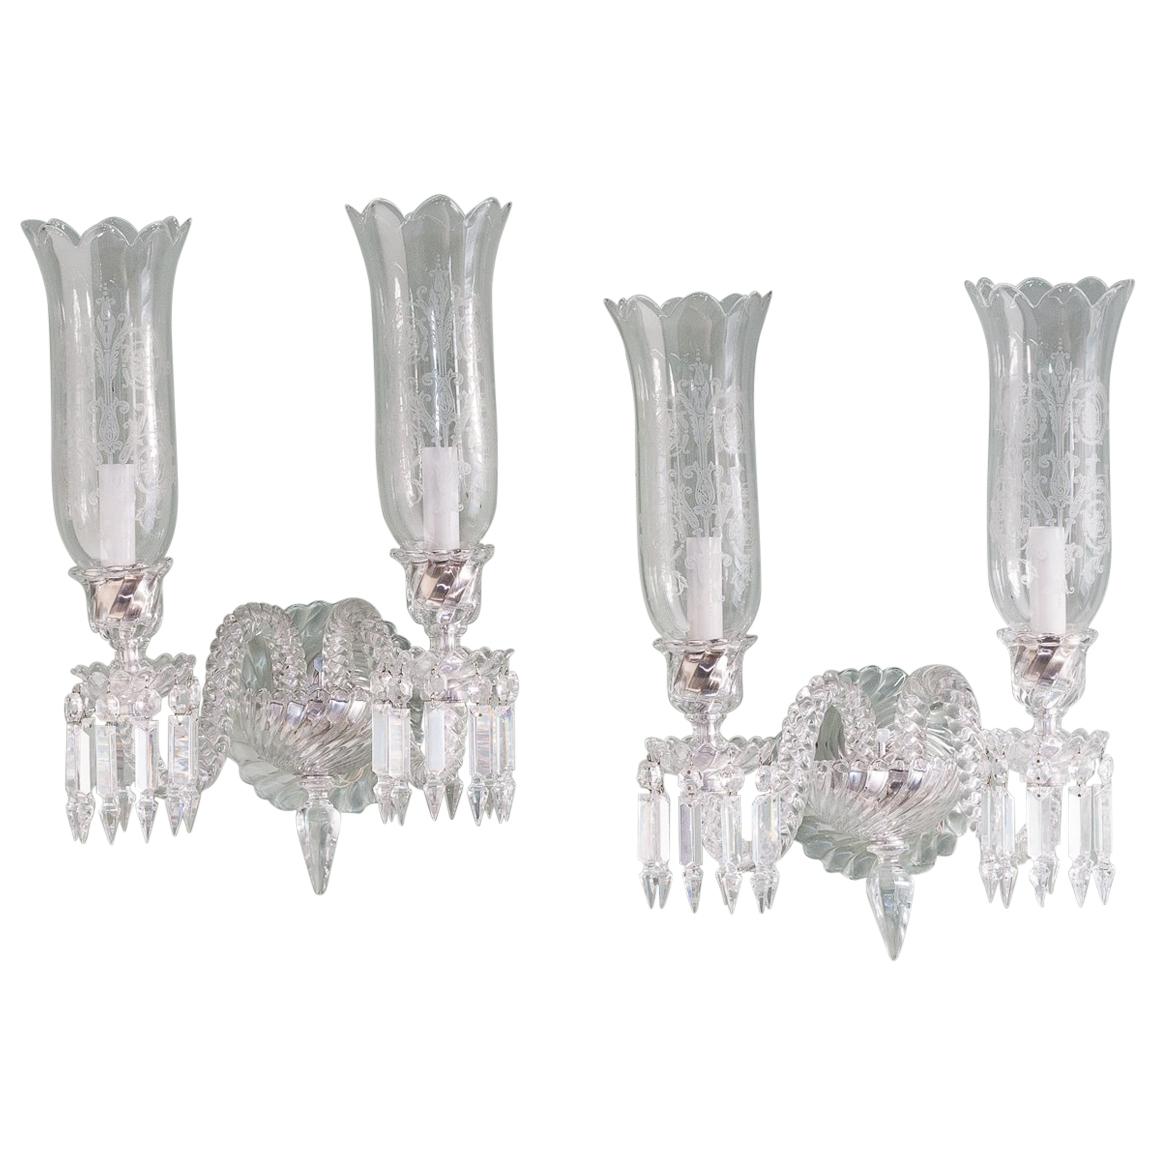 Pair of Baccarat Glass Wall Appliques